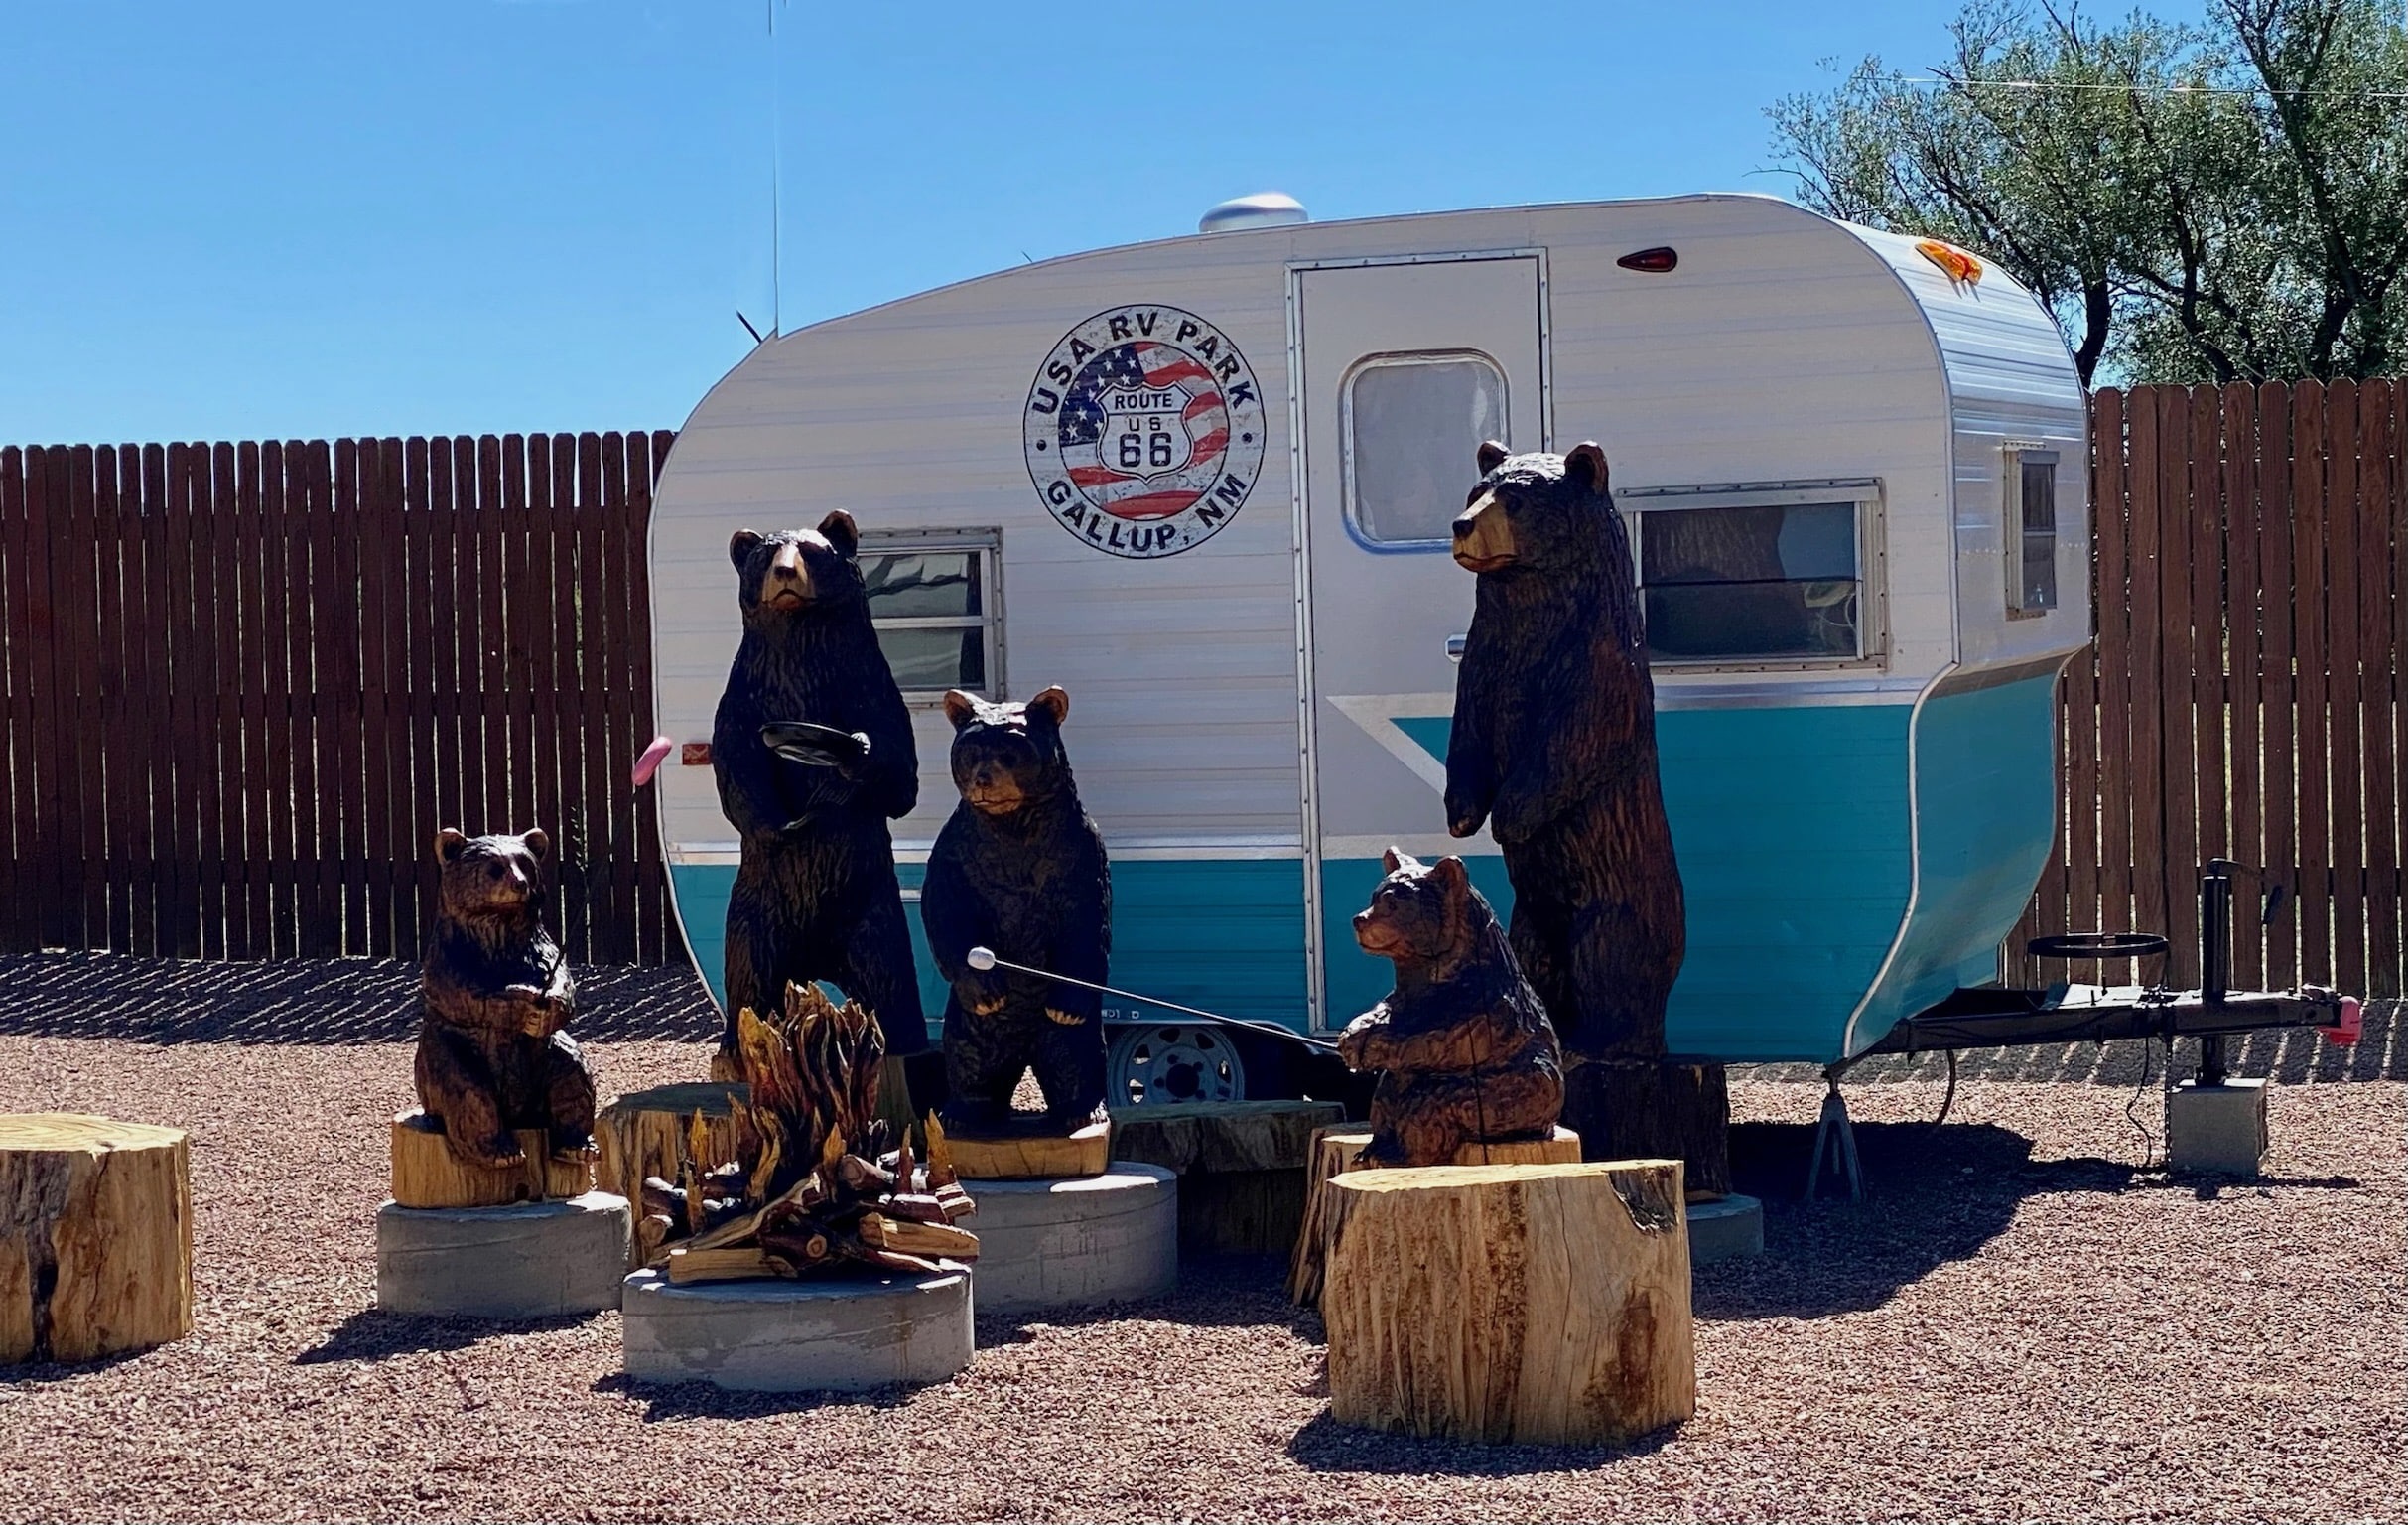 Statues of bears gathered around a travel trailer.